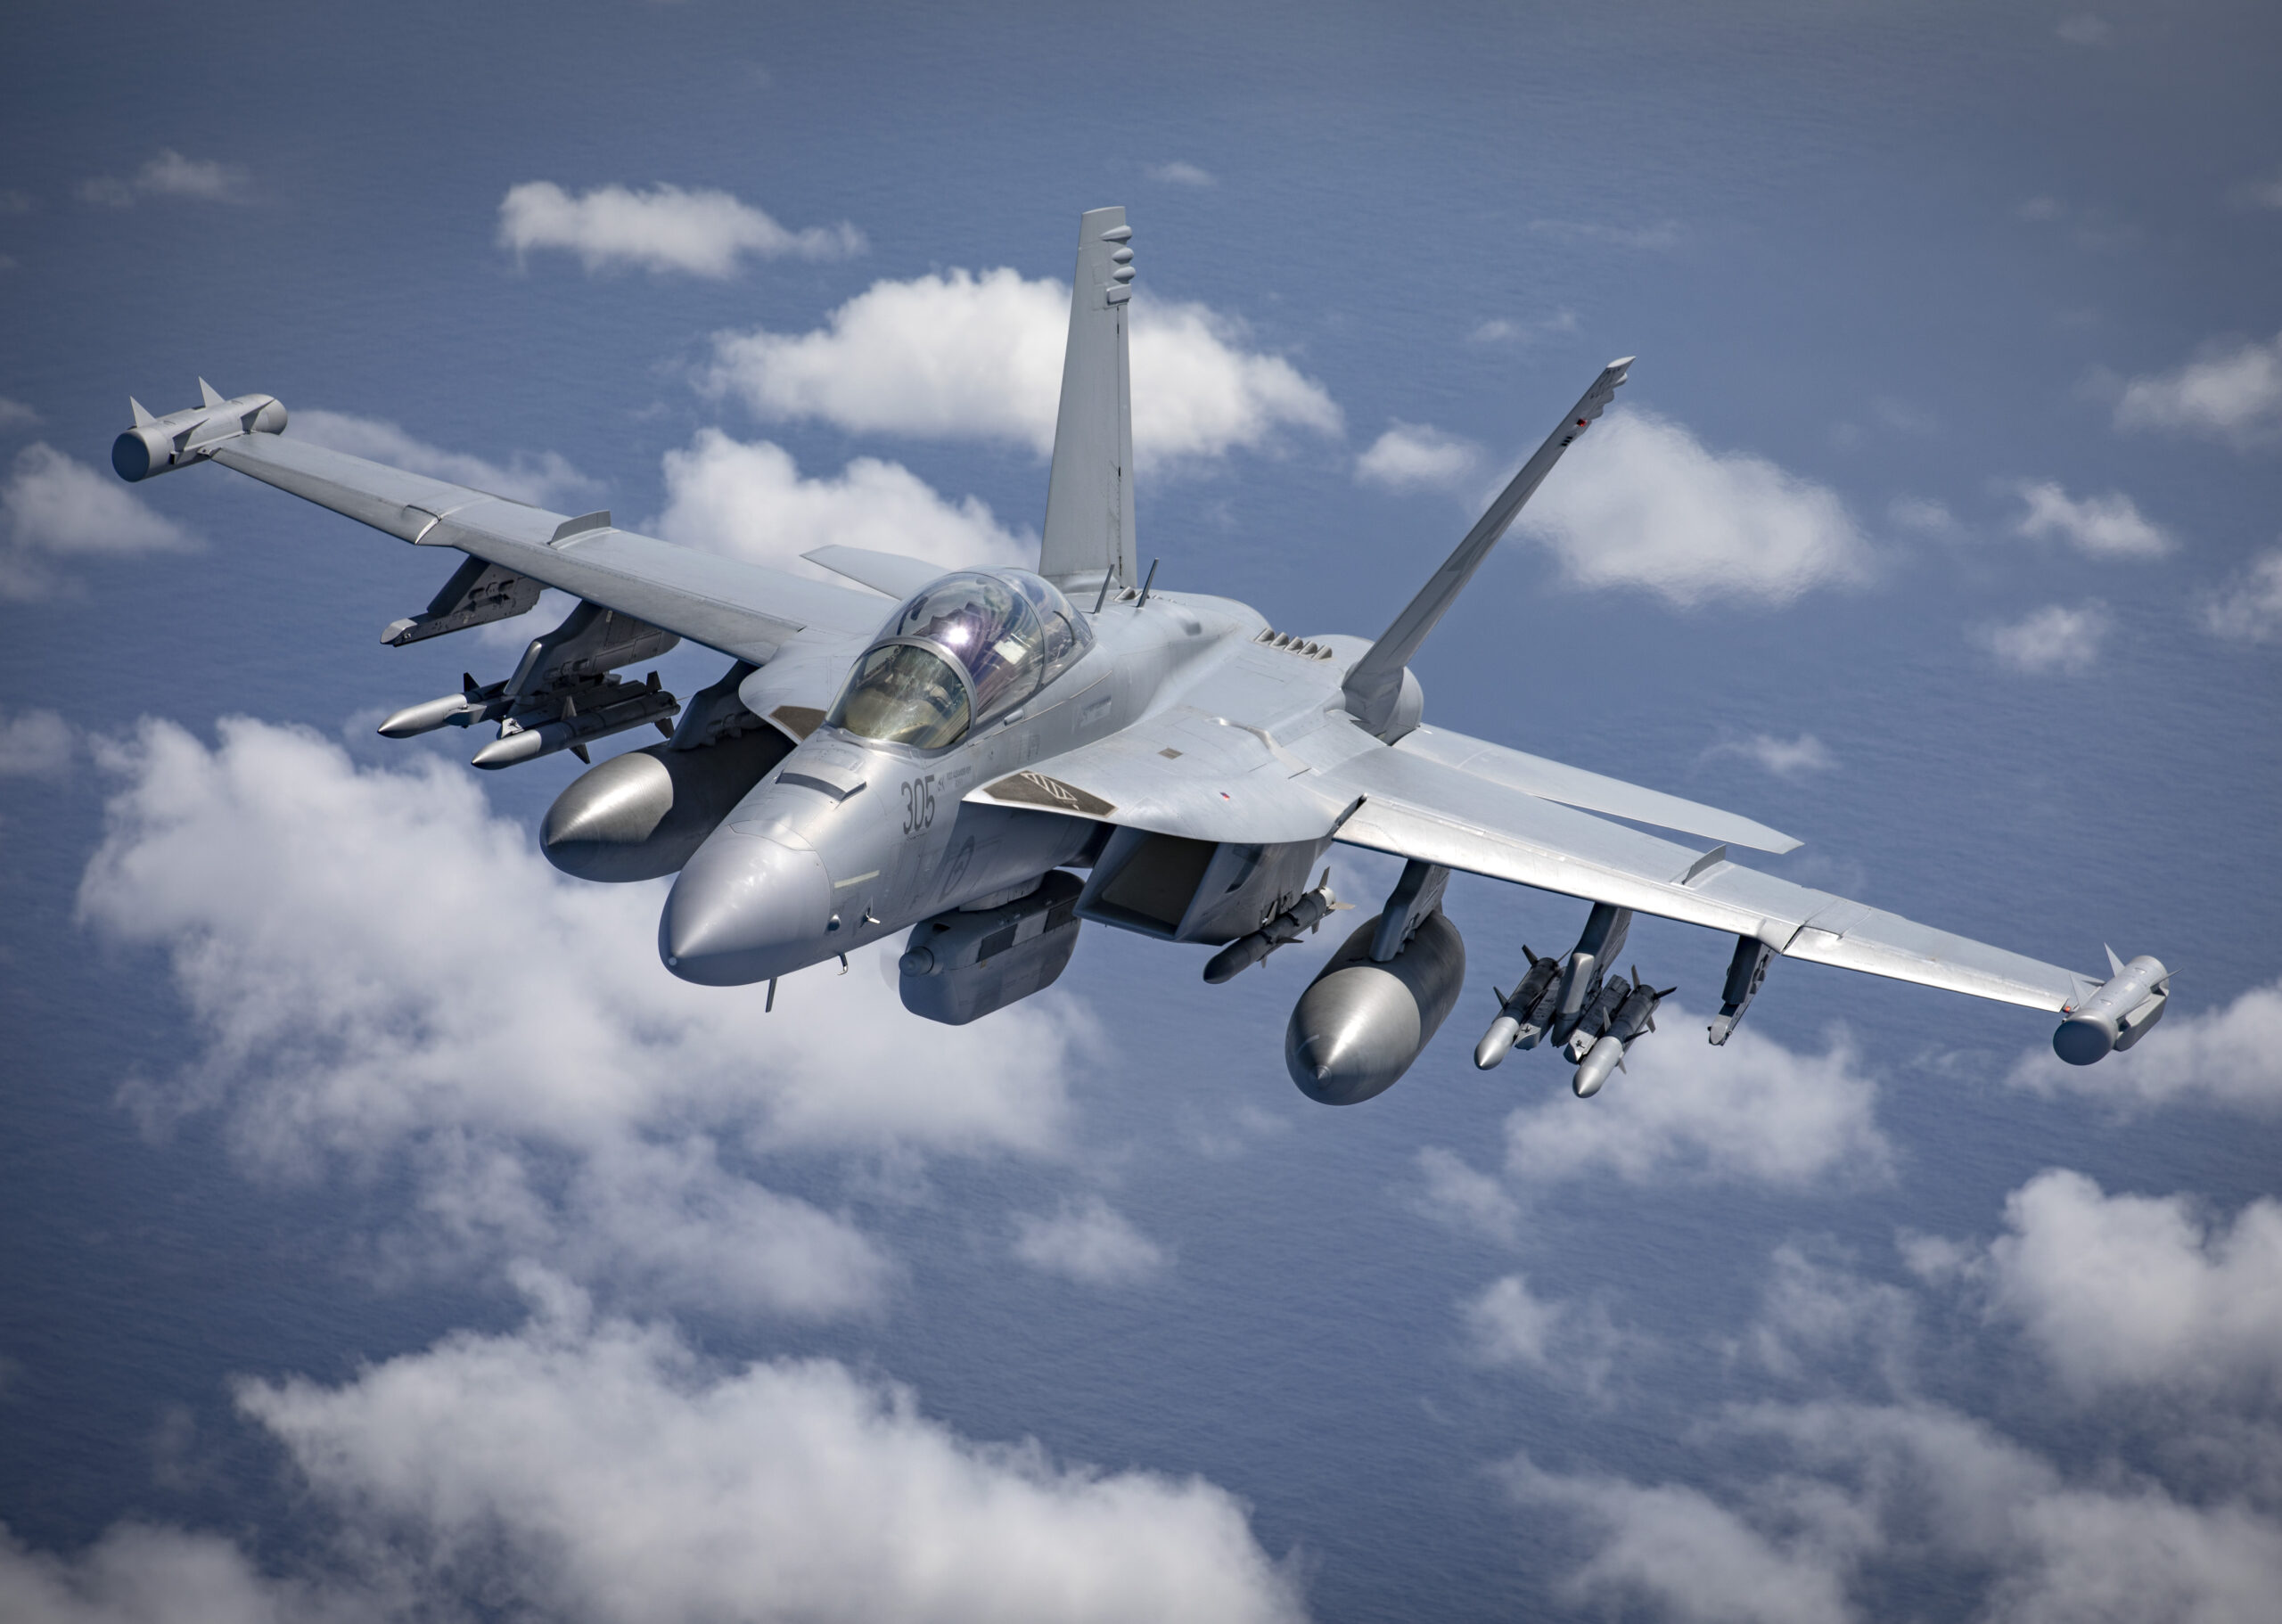 A46-305 EA-18G Growler from No. 6 Squadron conducts air-to-air formation flying off the coast of South East Queensland. *** Local Caption *** On 07 December 2021, No. 6, No. 1 and No. 36 Squadrons from RAAF Base Amberley conducted a formation flying activity with EA-18G Growlers, F/A-18F Super Hornets and a C-17A Globemaster III Aircraft off the coast of South East Queensland.